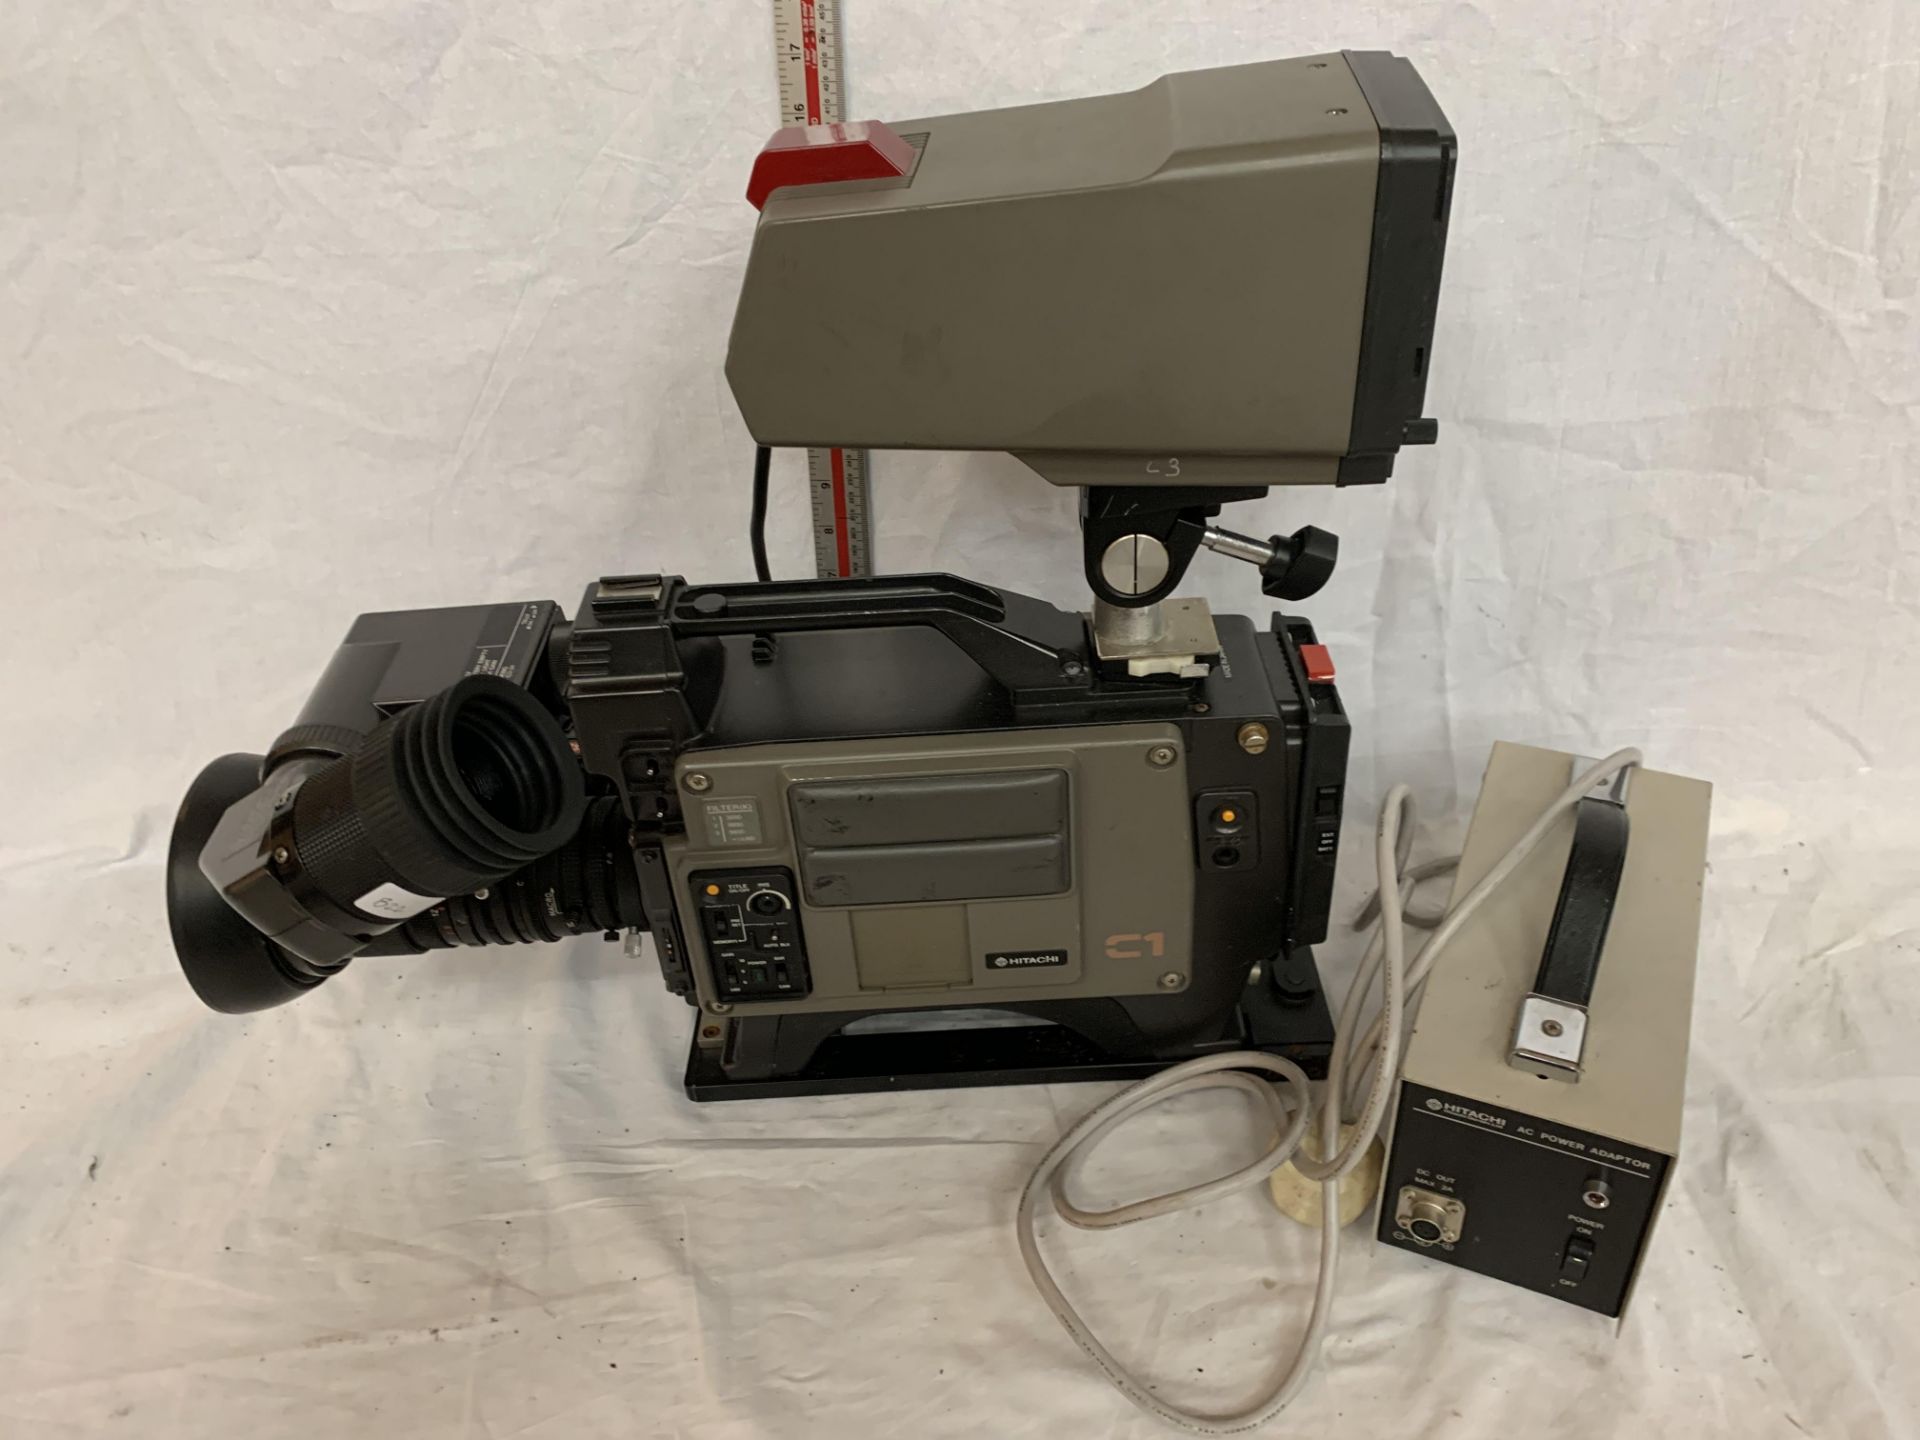 A HITACHI C1 BROADCAST CAMERA WITH ATTACHED SCREEN AND POWER PACK